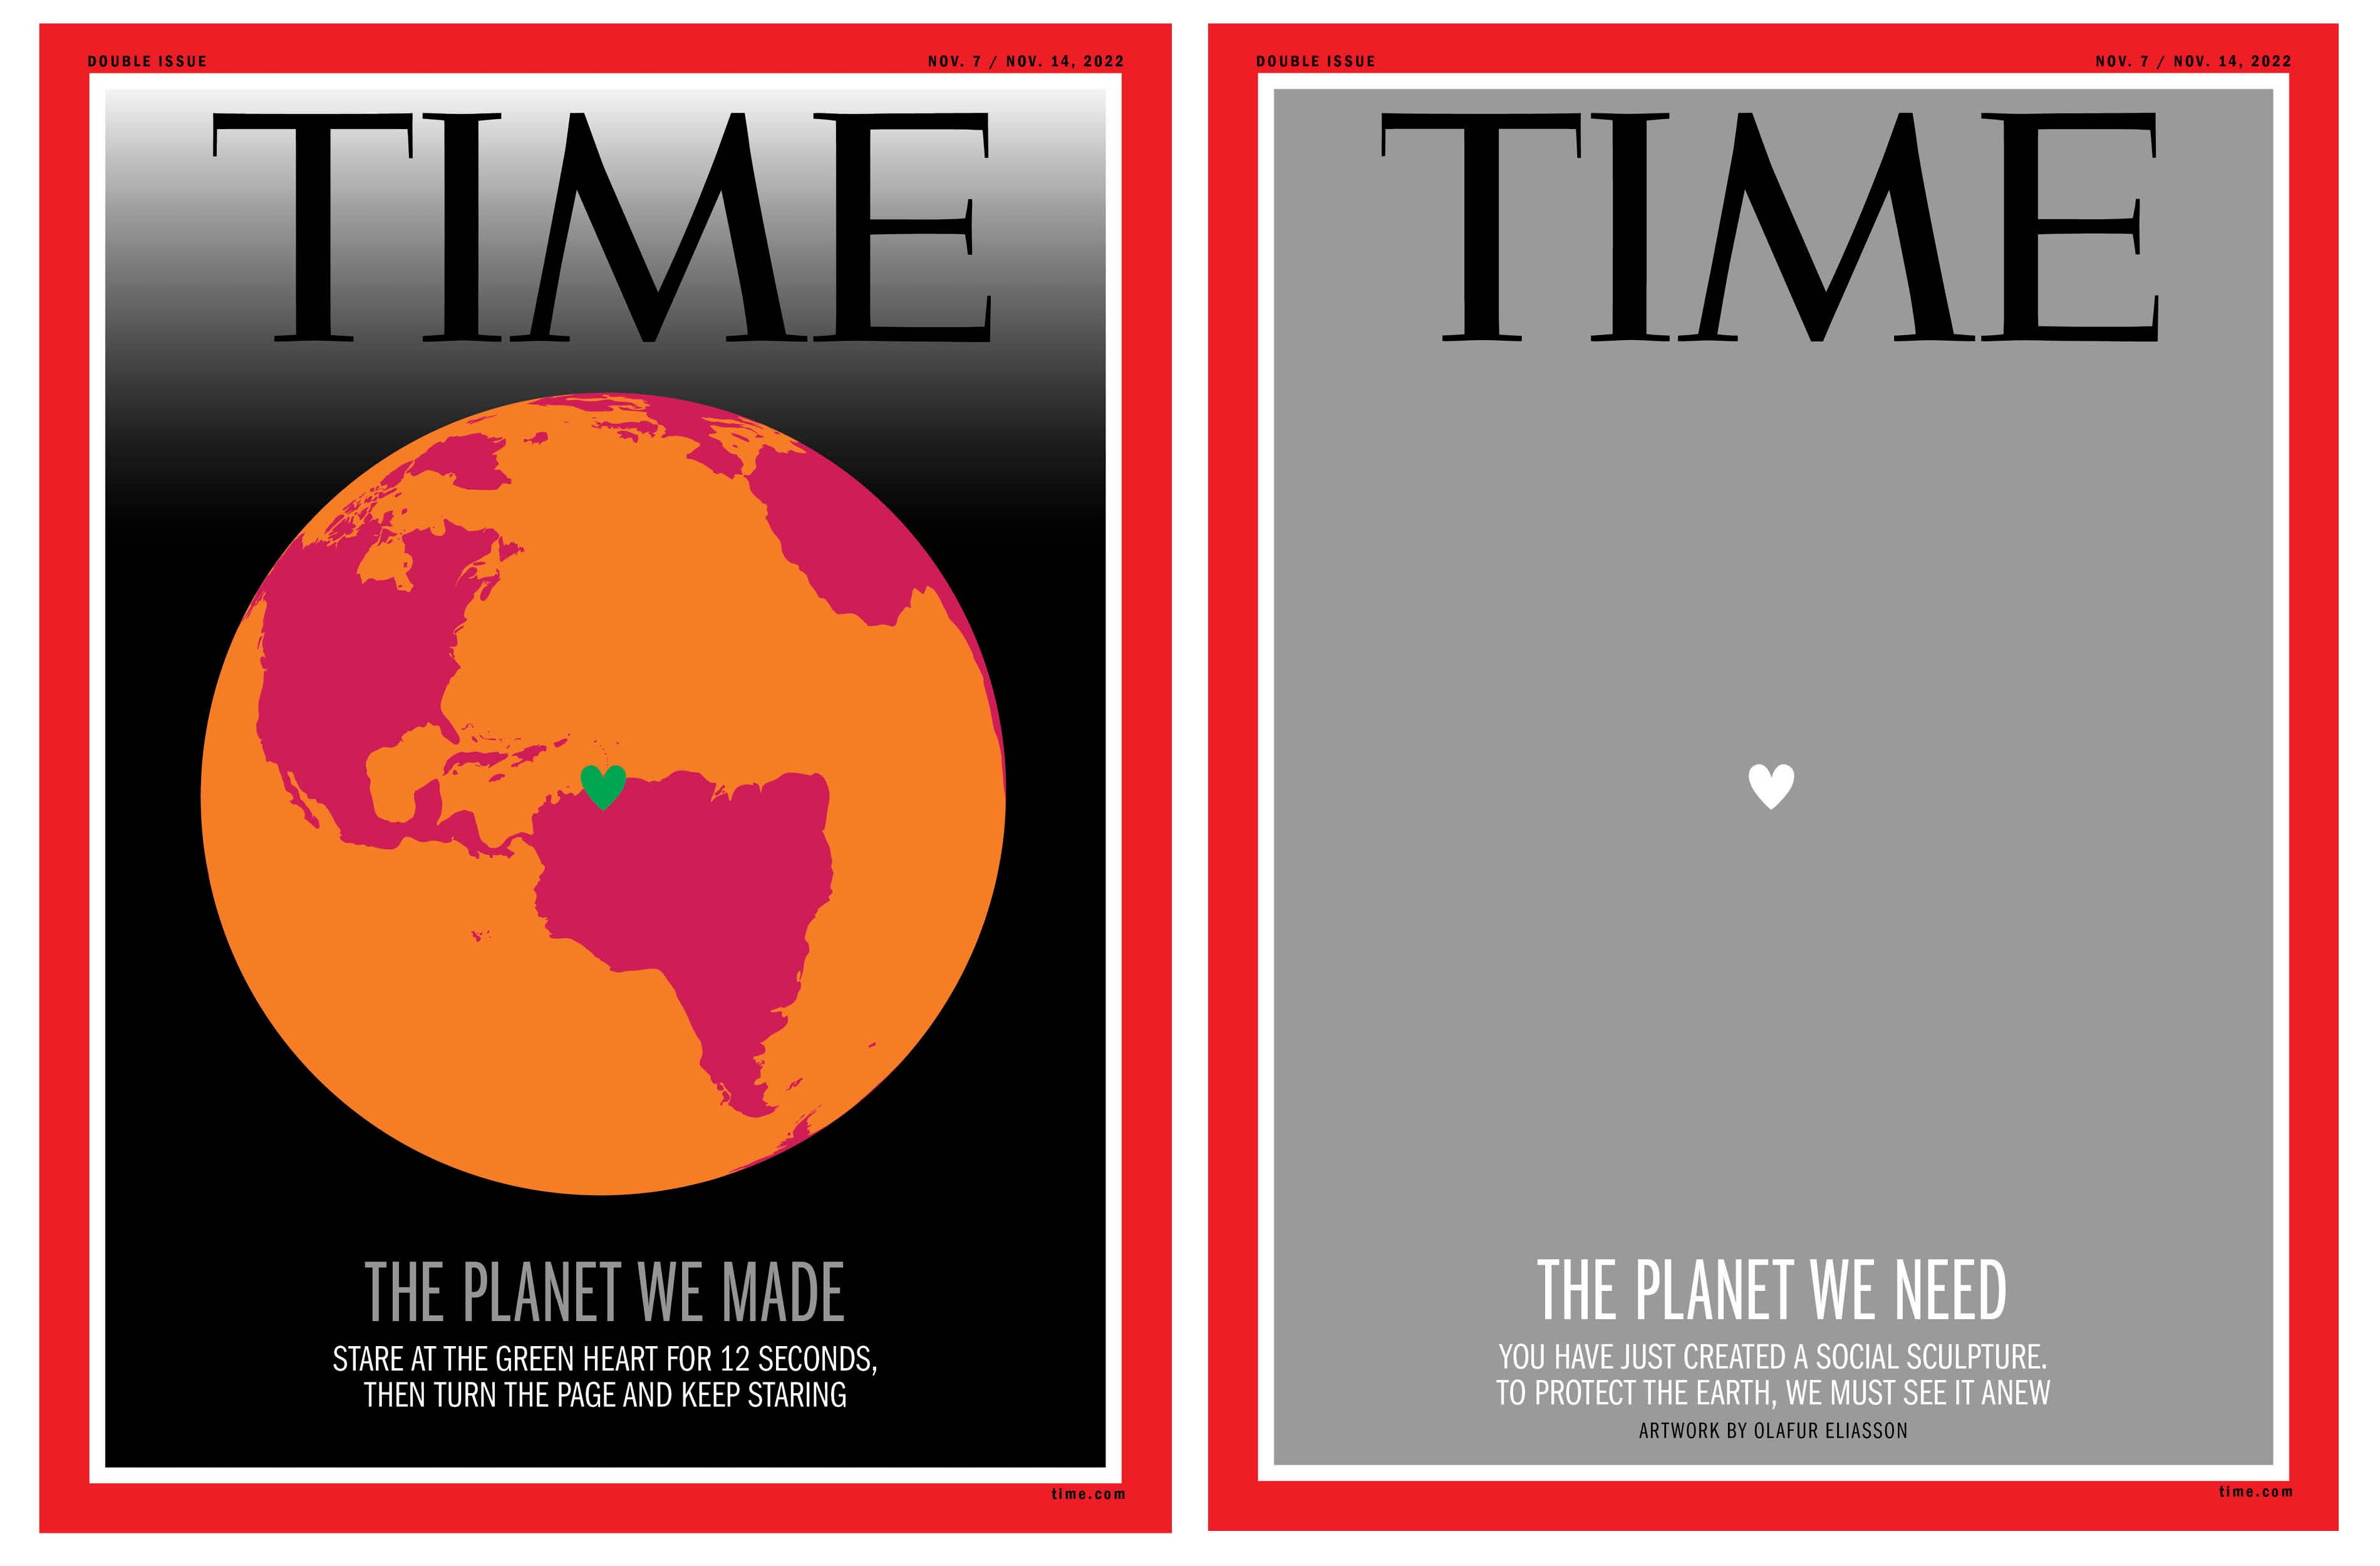 TIME “The Planet We Made . . . The Planet We Need” November 7/November 14, 2022